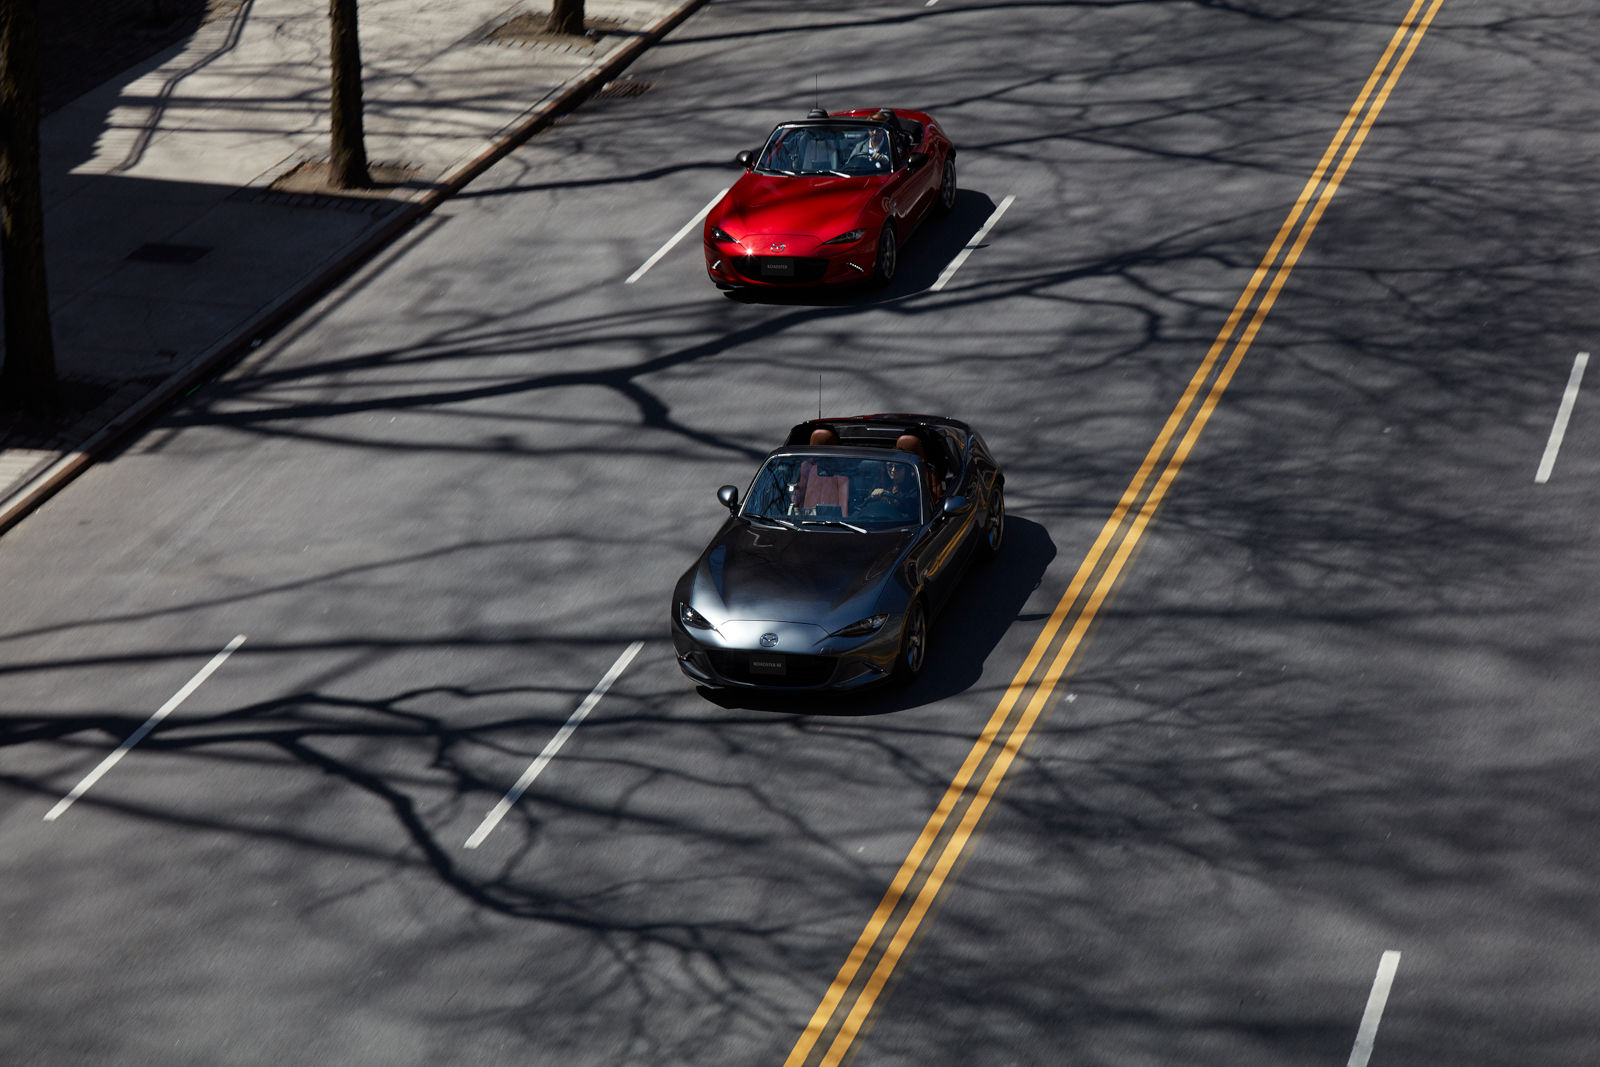 Gearing Up For Summer With the 2023 Mazda MX-5